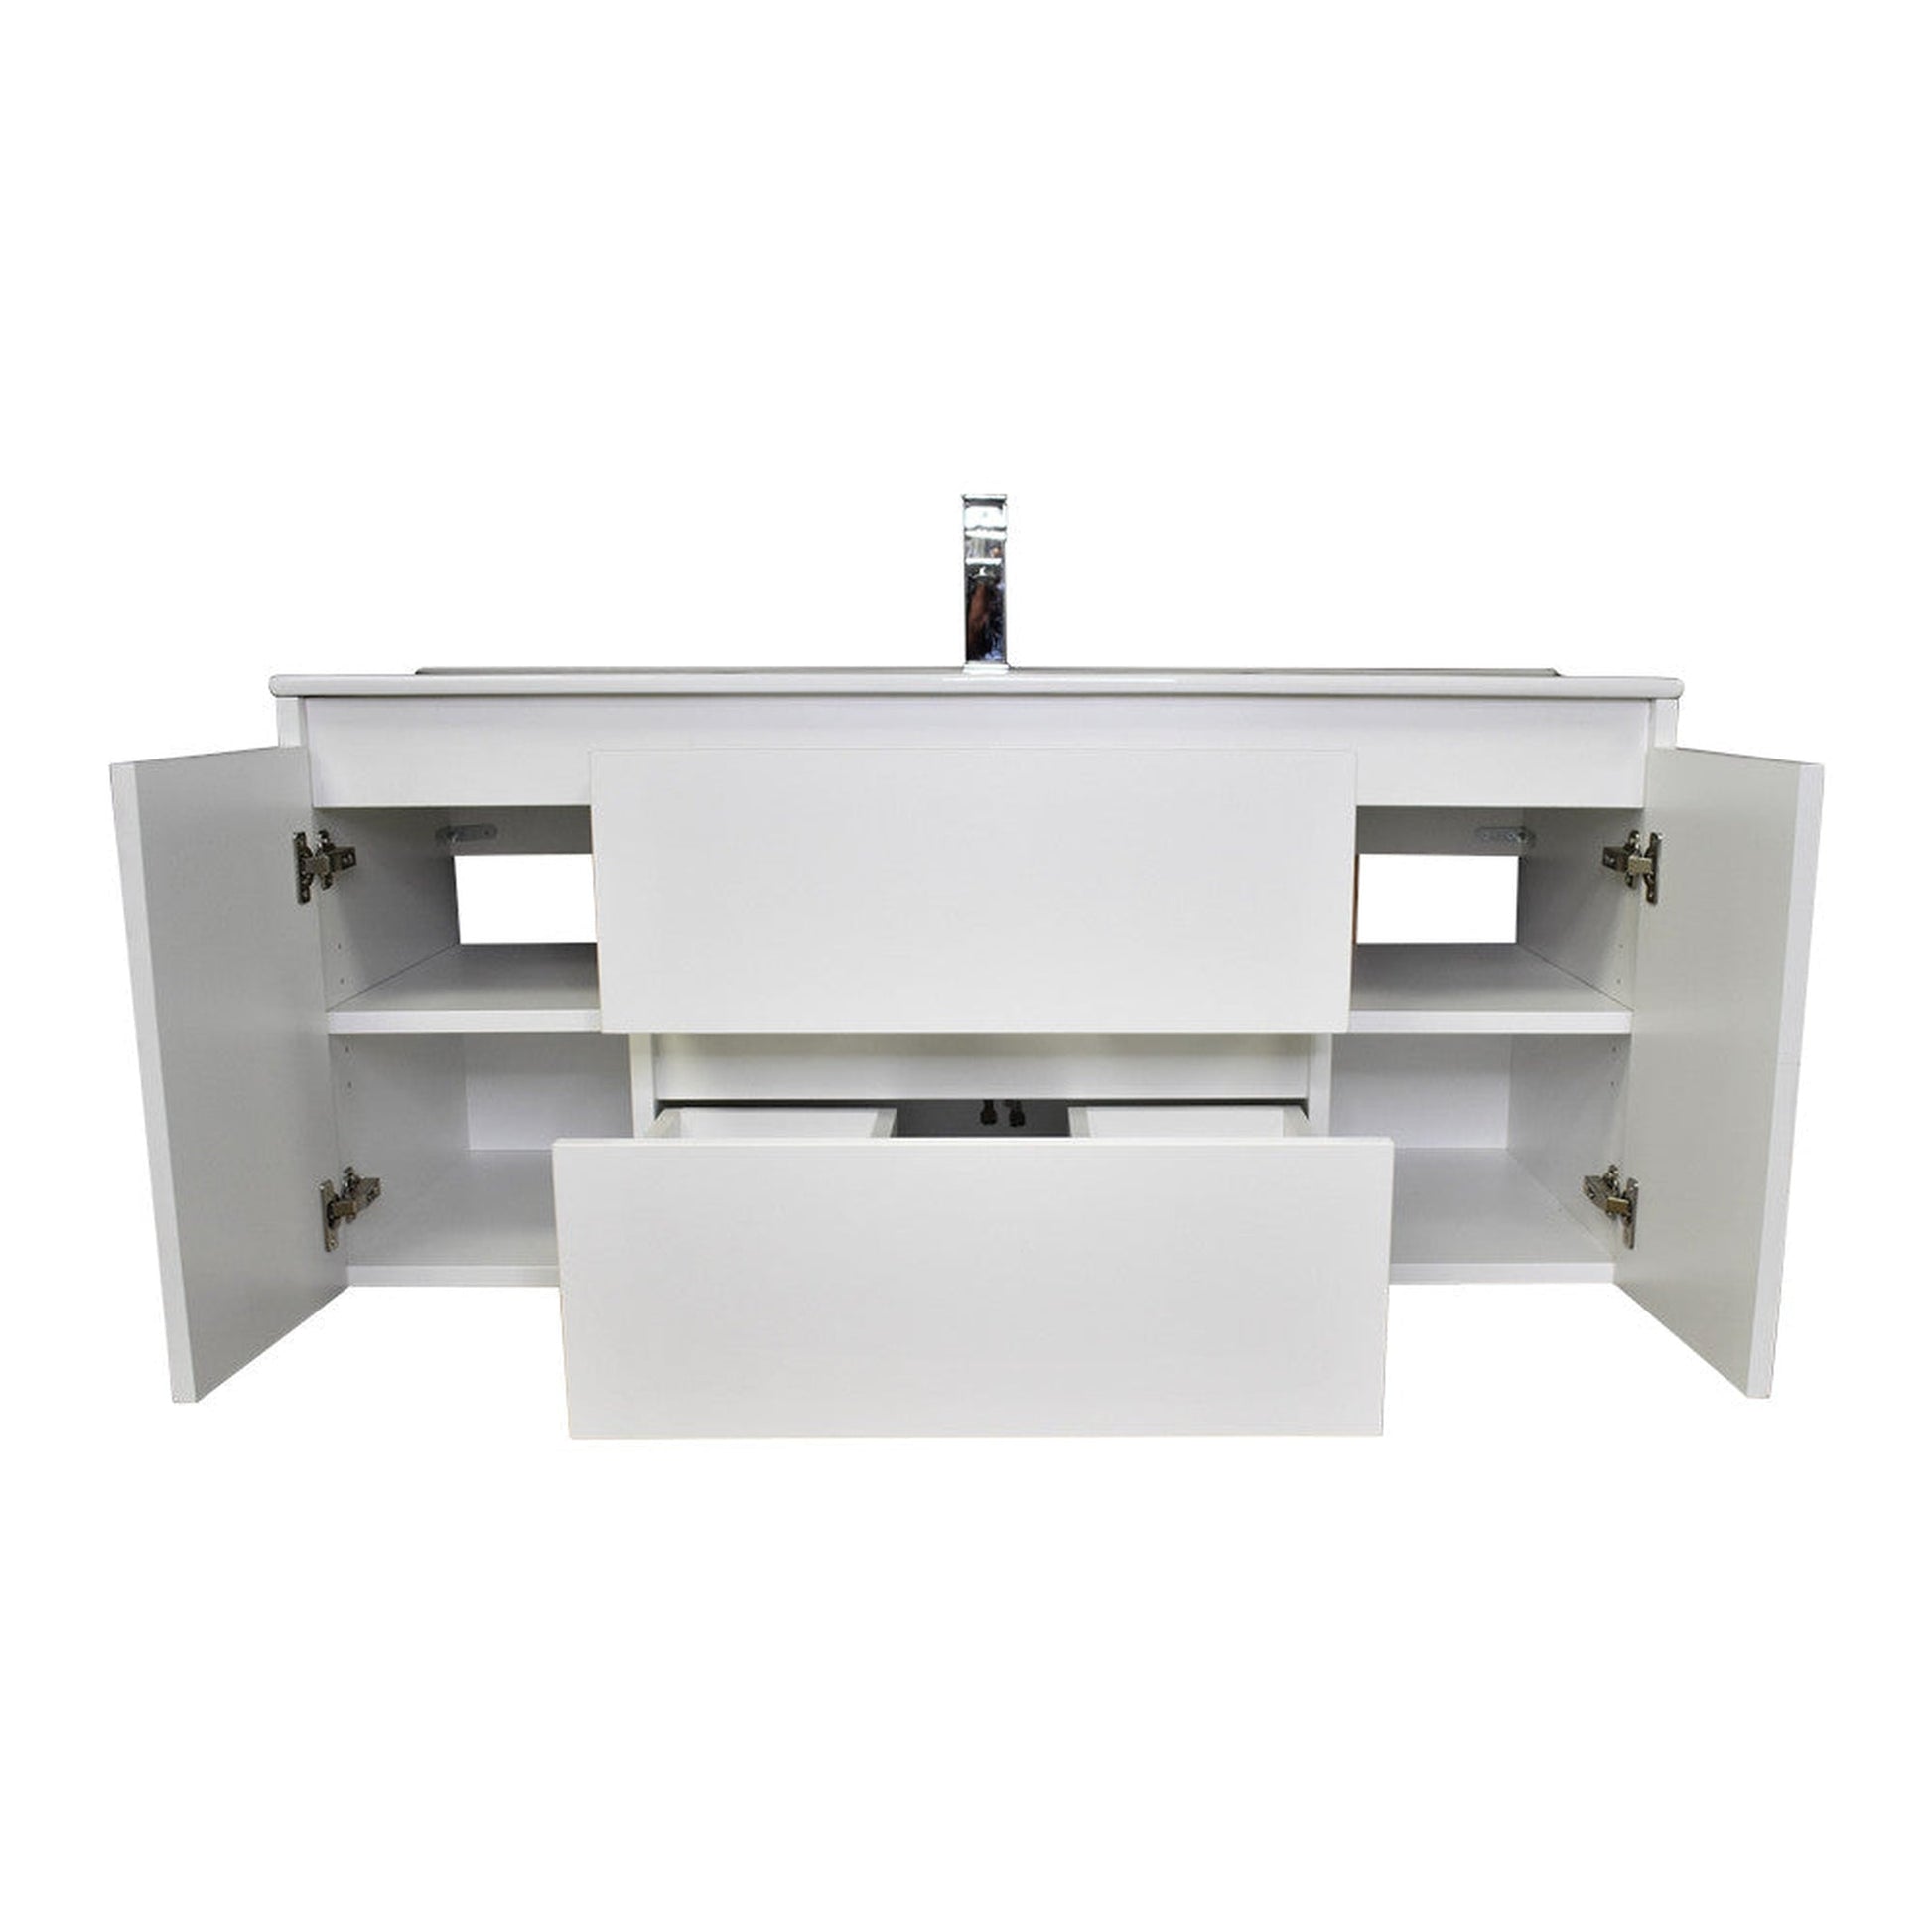 Volpa USA Salt 48" x 18" Glossy White Wall-Mounted Floating Bathroom Vanity With Drawers, Integrated Porcelain Ceramic Top and Integrated Ceramic Sink